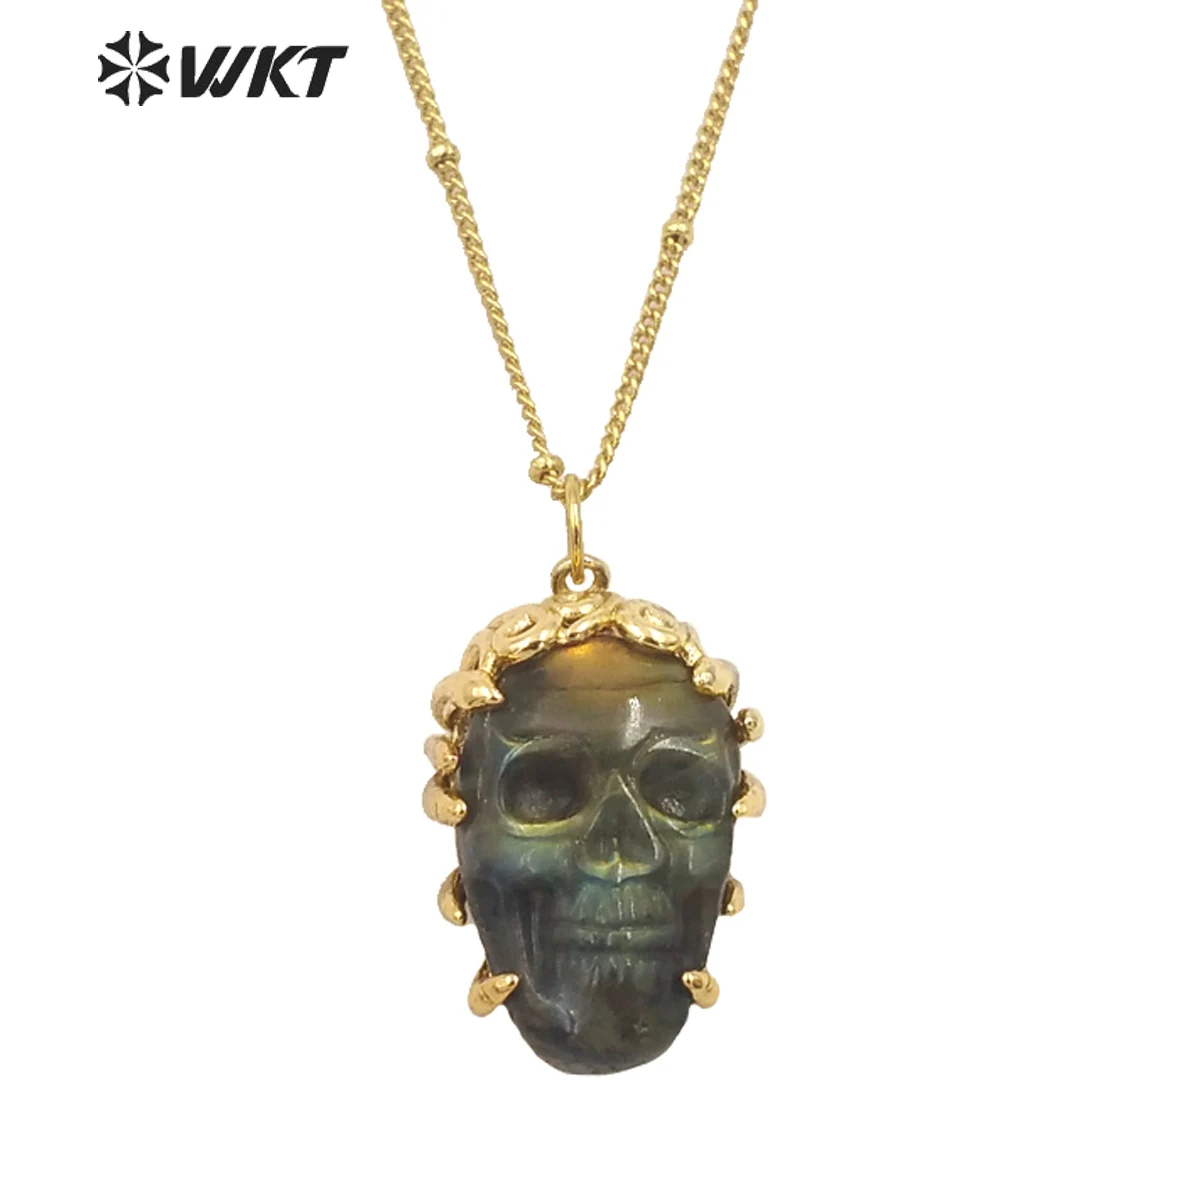 

WT-N1462 New Arrival Special Skull Shape Labradorite Stone 18k Gold Plated For Rock Or Hip-Hop Lovers Unique Necklace